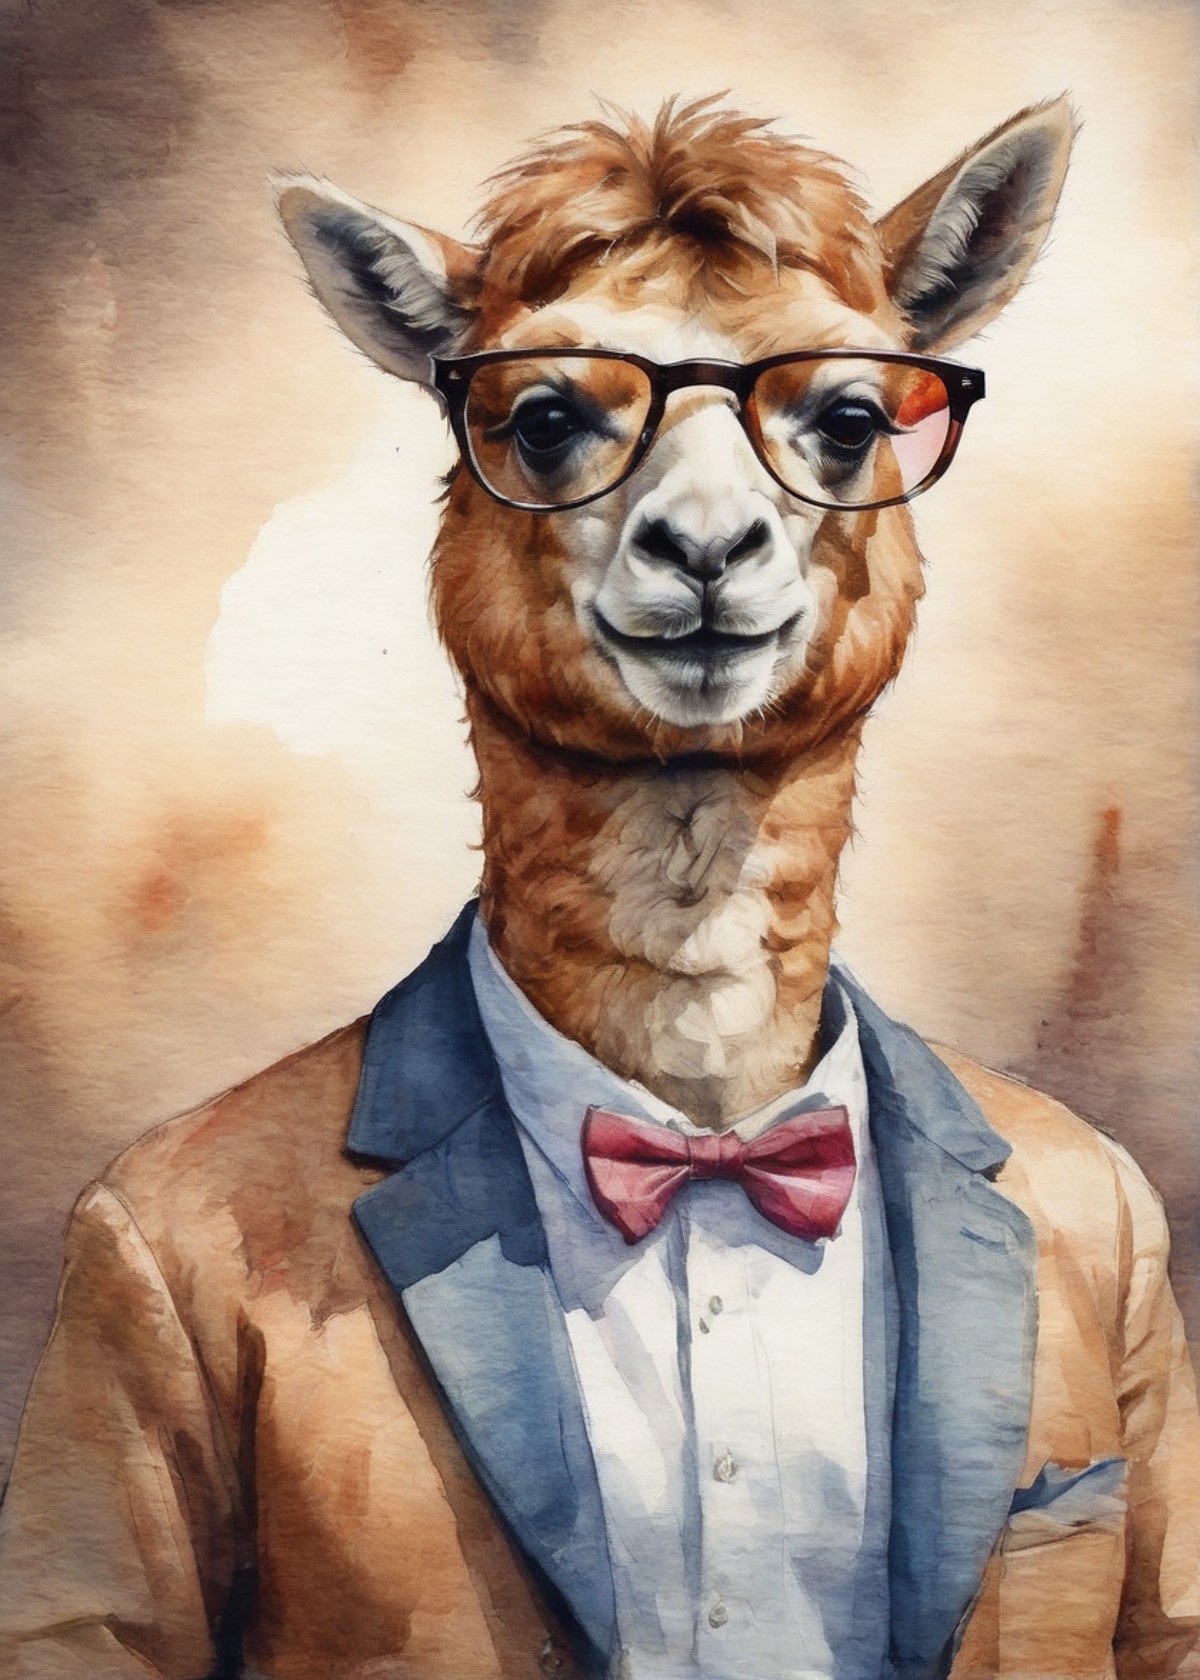 a pretentious hipster alpaca with sunglasses on a magazine cover watercolor painting portrait